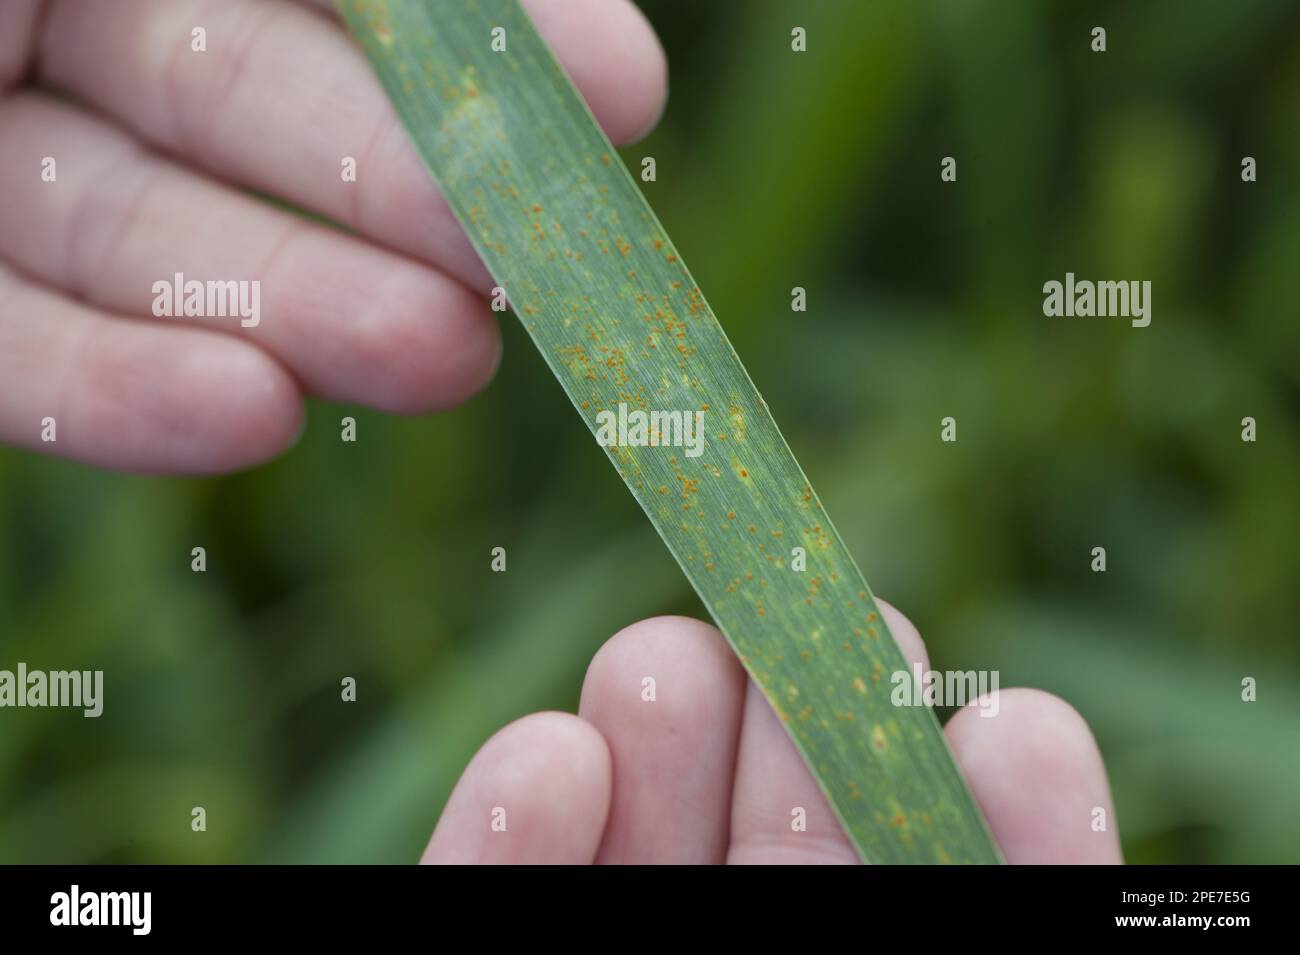 Wheat (Triticum aestivum), leaf infected with brown rust fungal disease (Puccinia recondita), Lincolnshire, England, United Kingdom Stock Photo